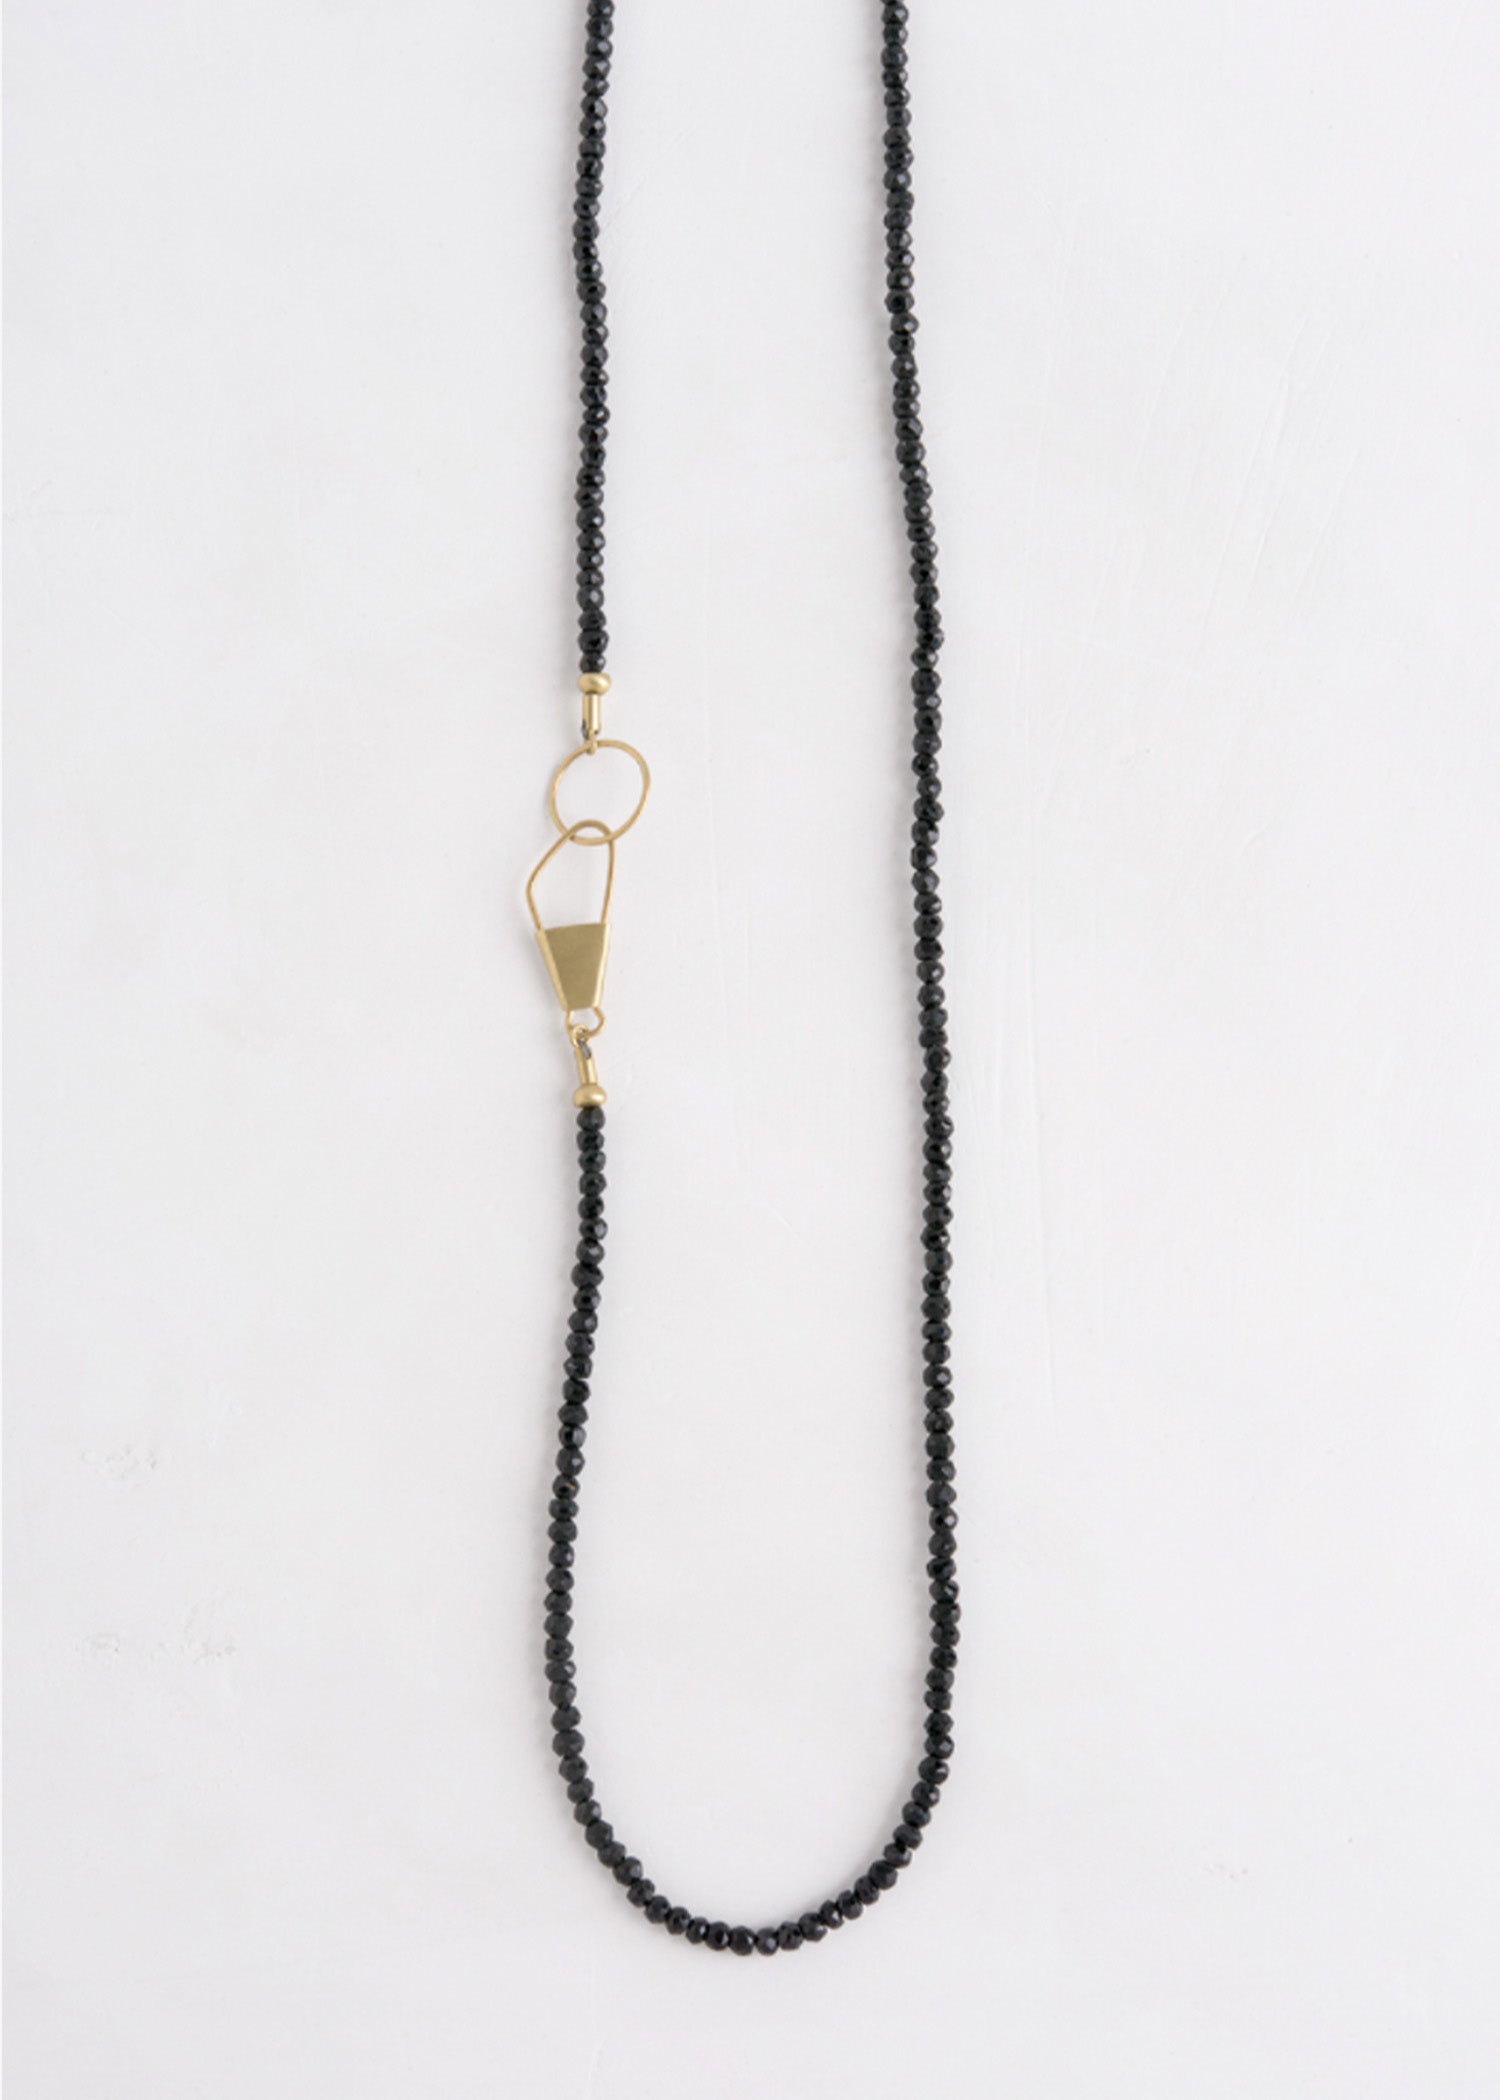 agas-tamar-necklace-ntn014 | Jewelry | Agas and Tamar